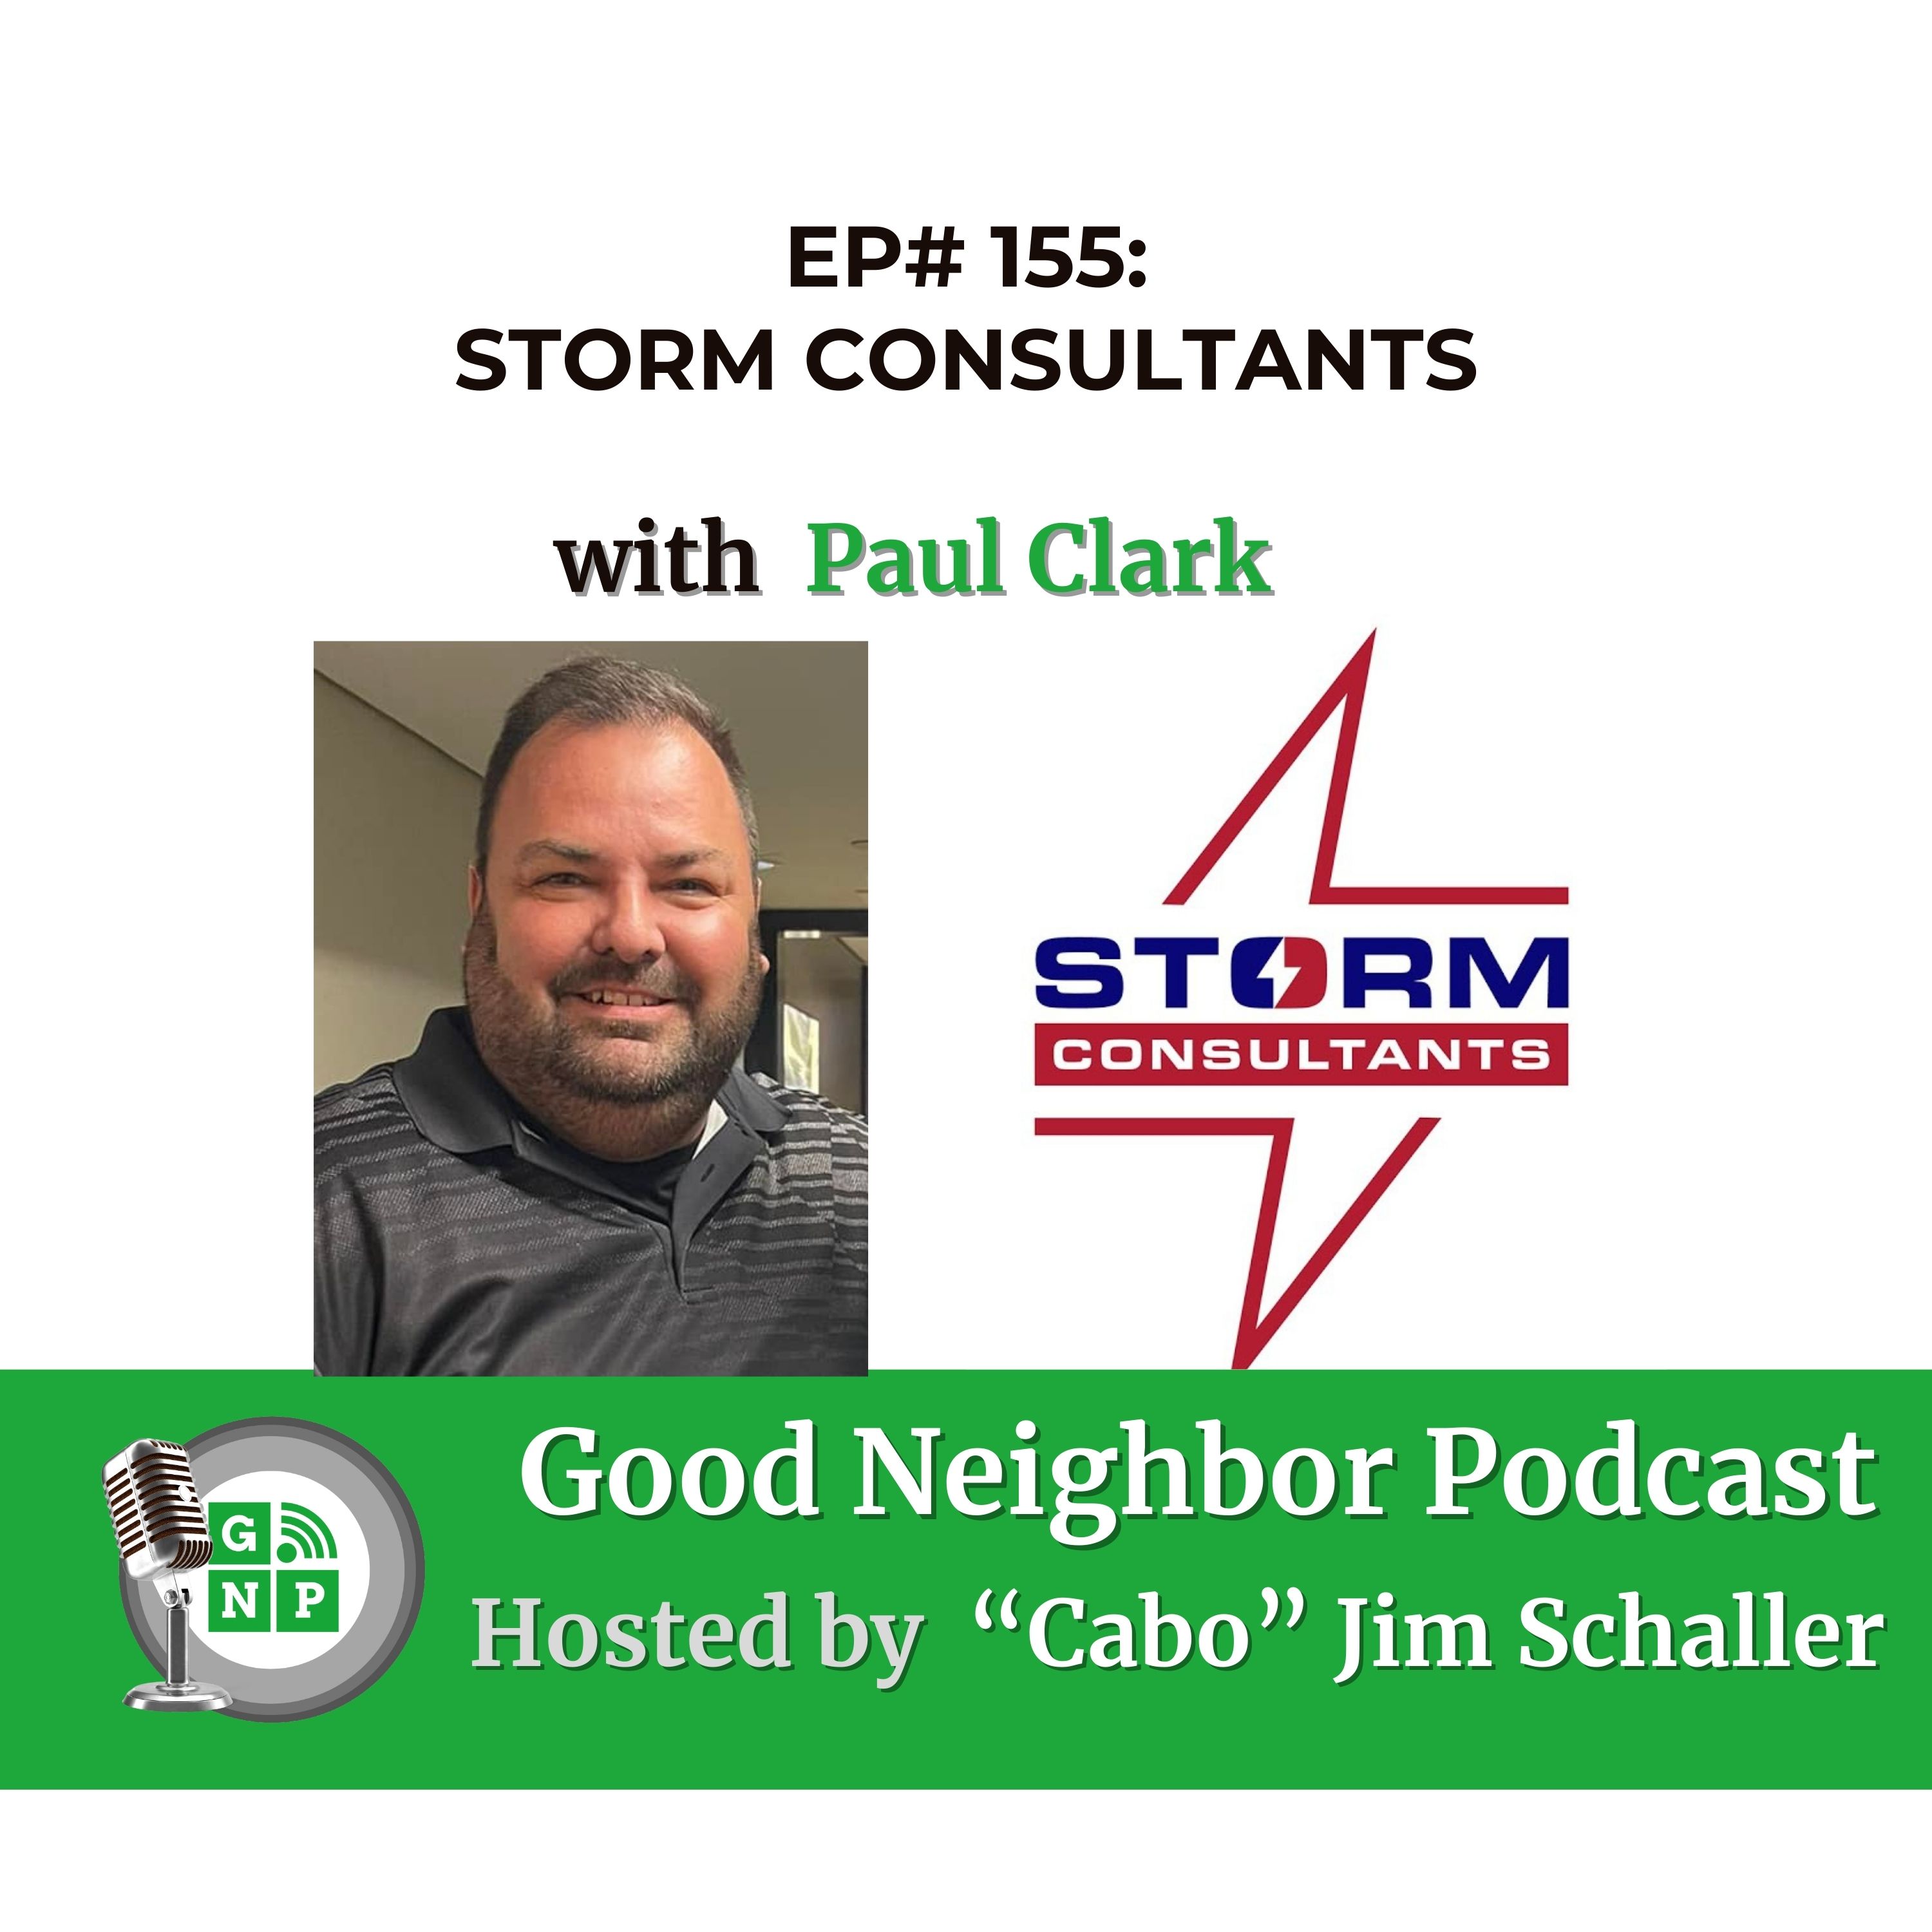 EP# 155 - Paul Clark's Masterclass on Navigating Insurance Claims and Restoration Post-Disaster